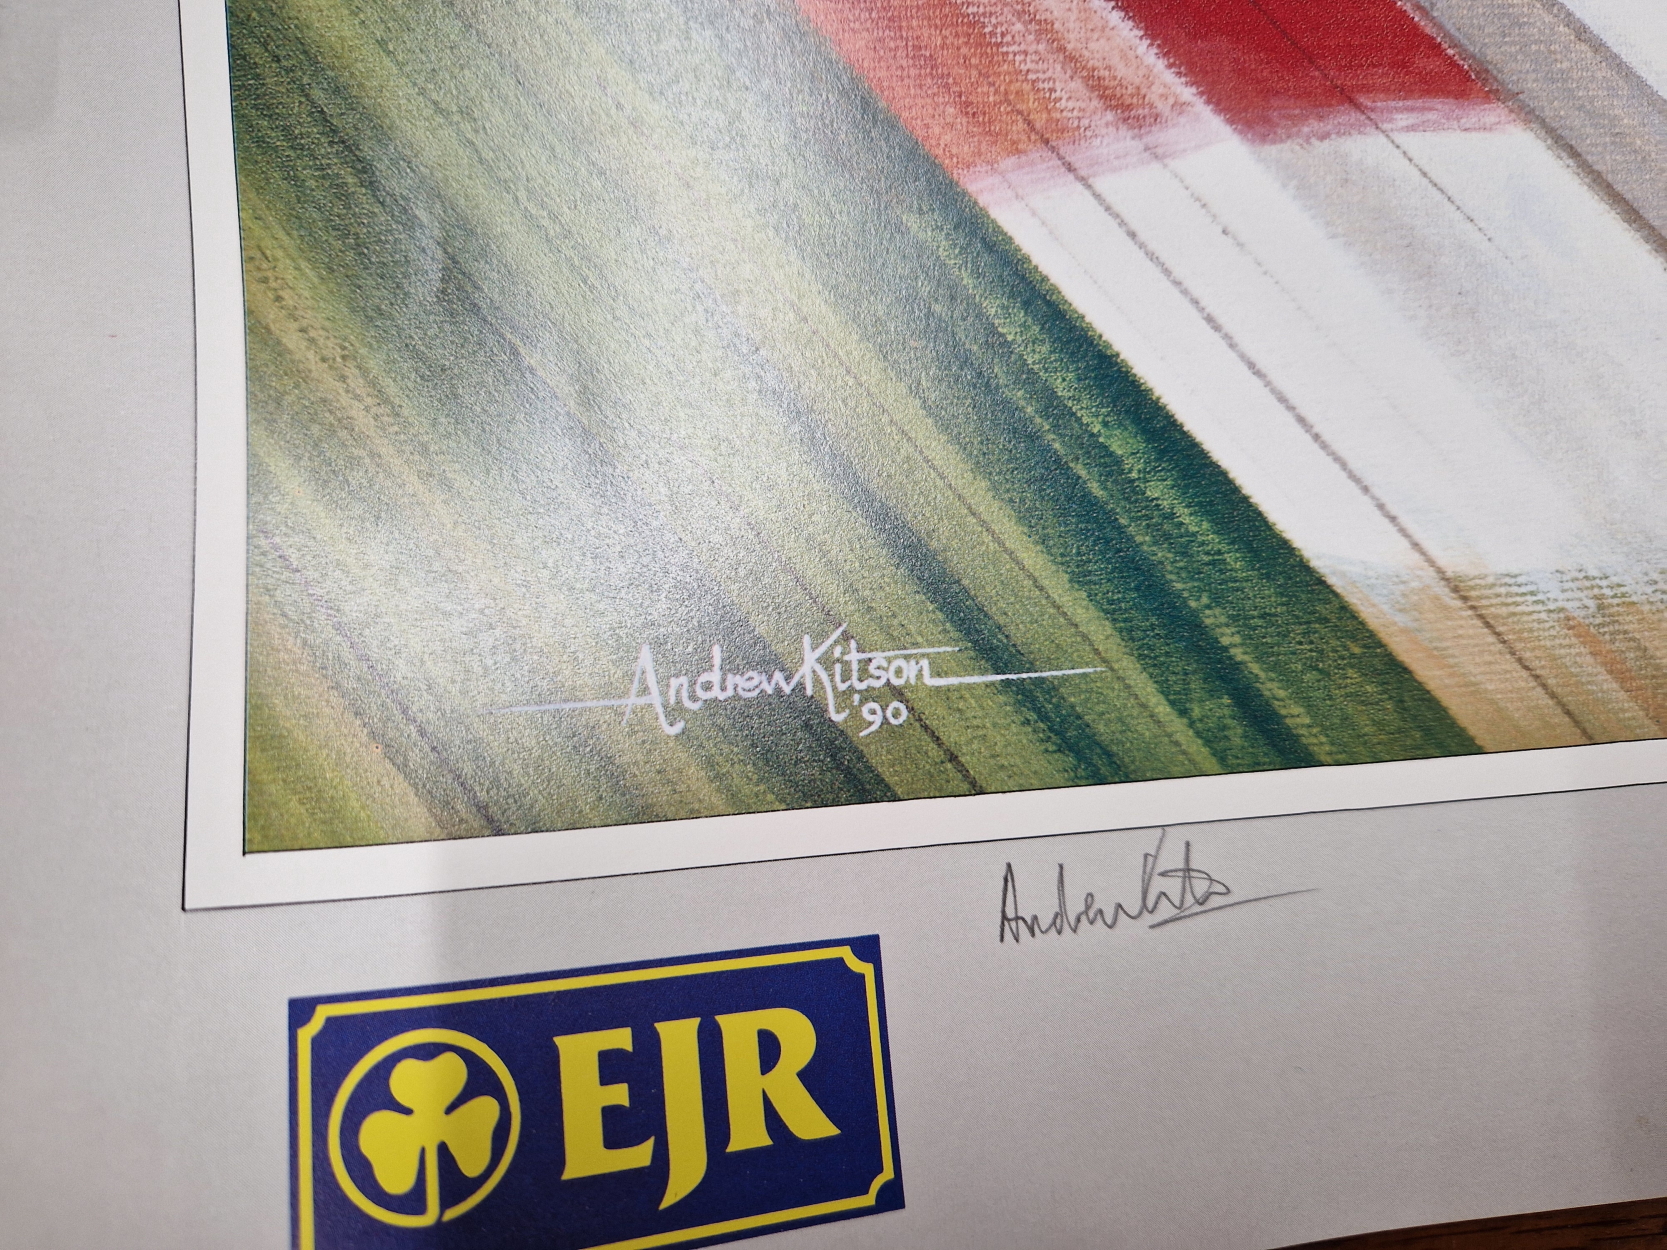 JORDAN FORMULA 1 RACING SIGNED GIANCARLO FISICHELLA POSTER. AND AN ANDREW KITSON SIGNED PRINT (2) - Image 2 of 6